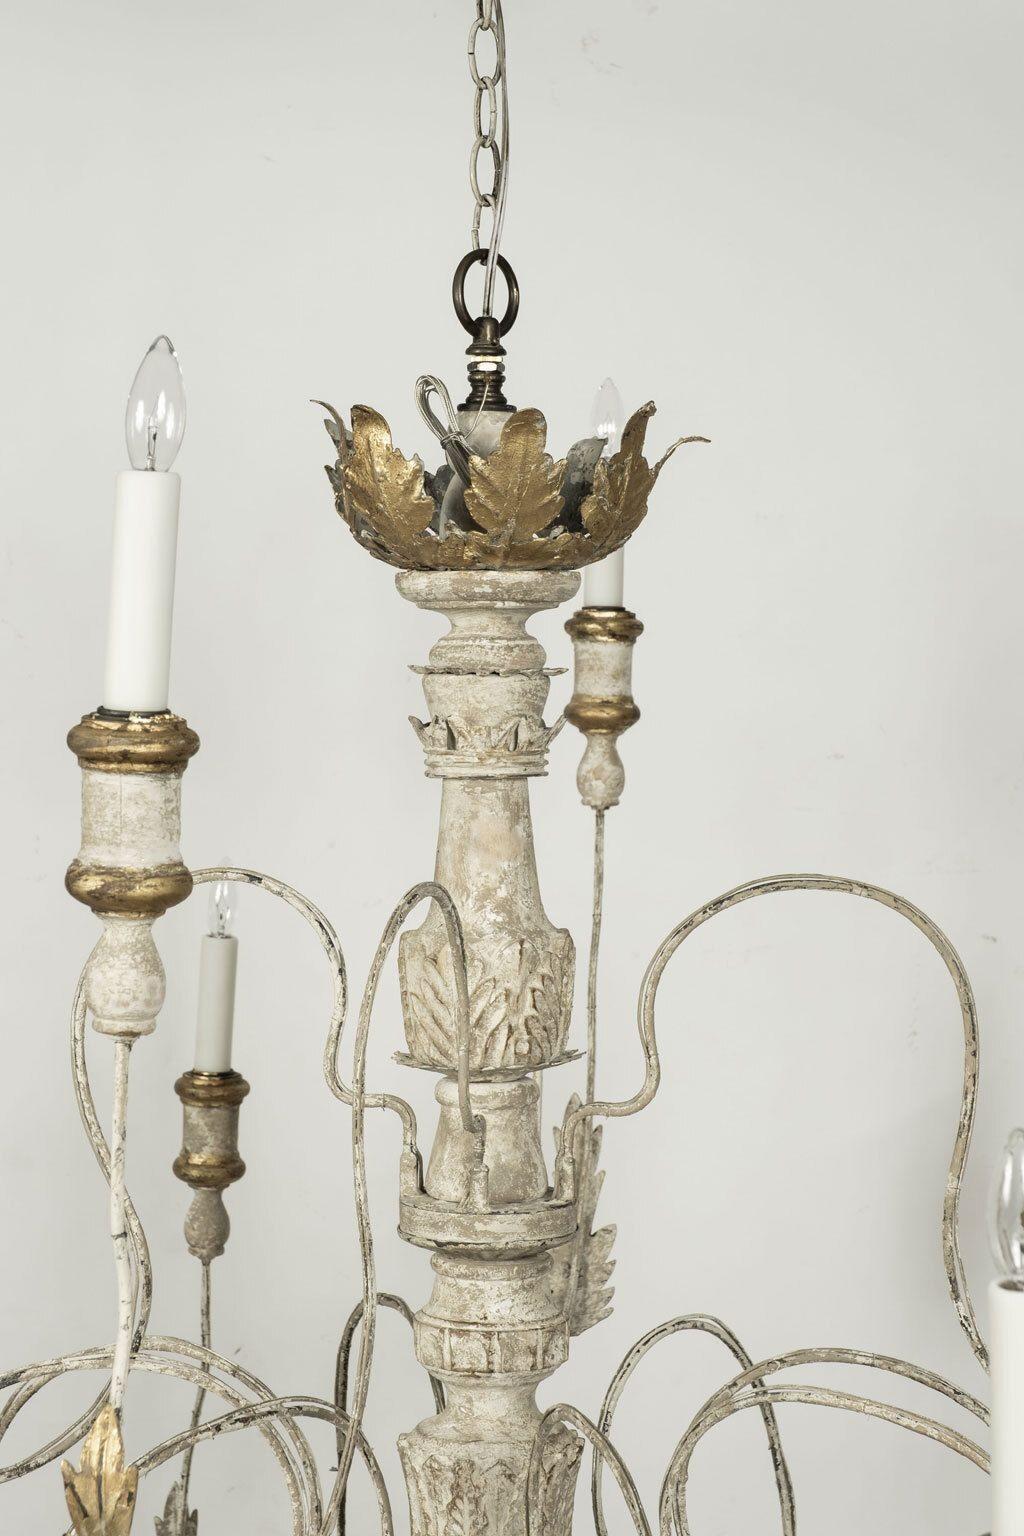 Large twelve-arm Italian chandelier, newly-constructed from 18th century and later elements. Chandelier is two tiers: lower tier has eight arms and upper tier has four arms. Gilded acanthus leave decoration adorns each arm. Newly wired, using UL